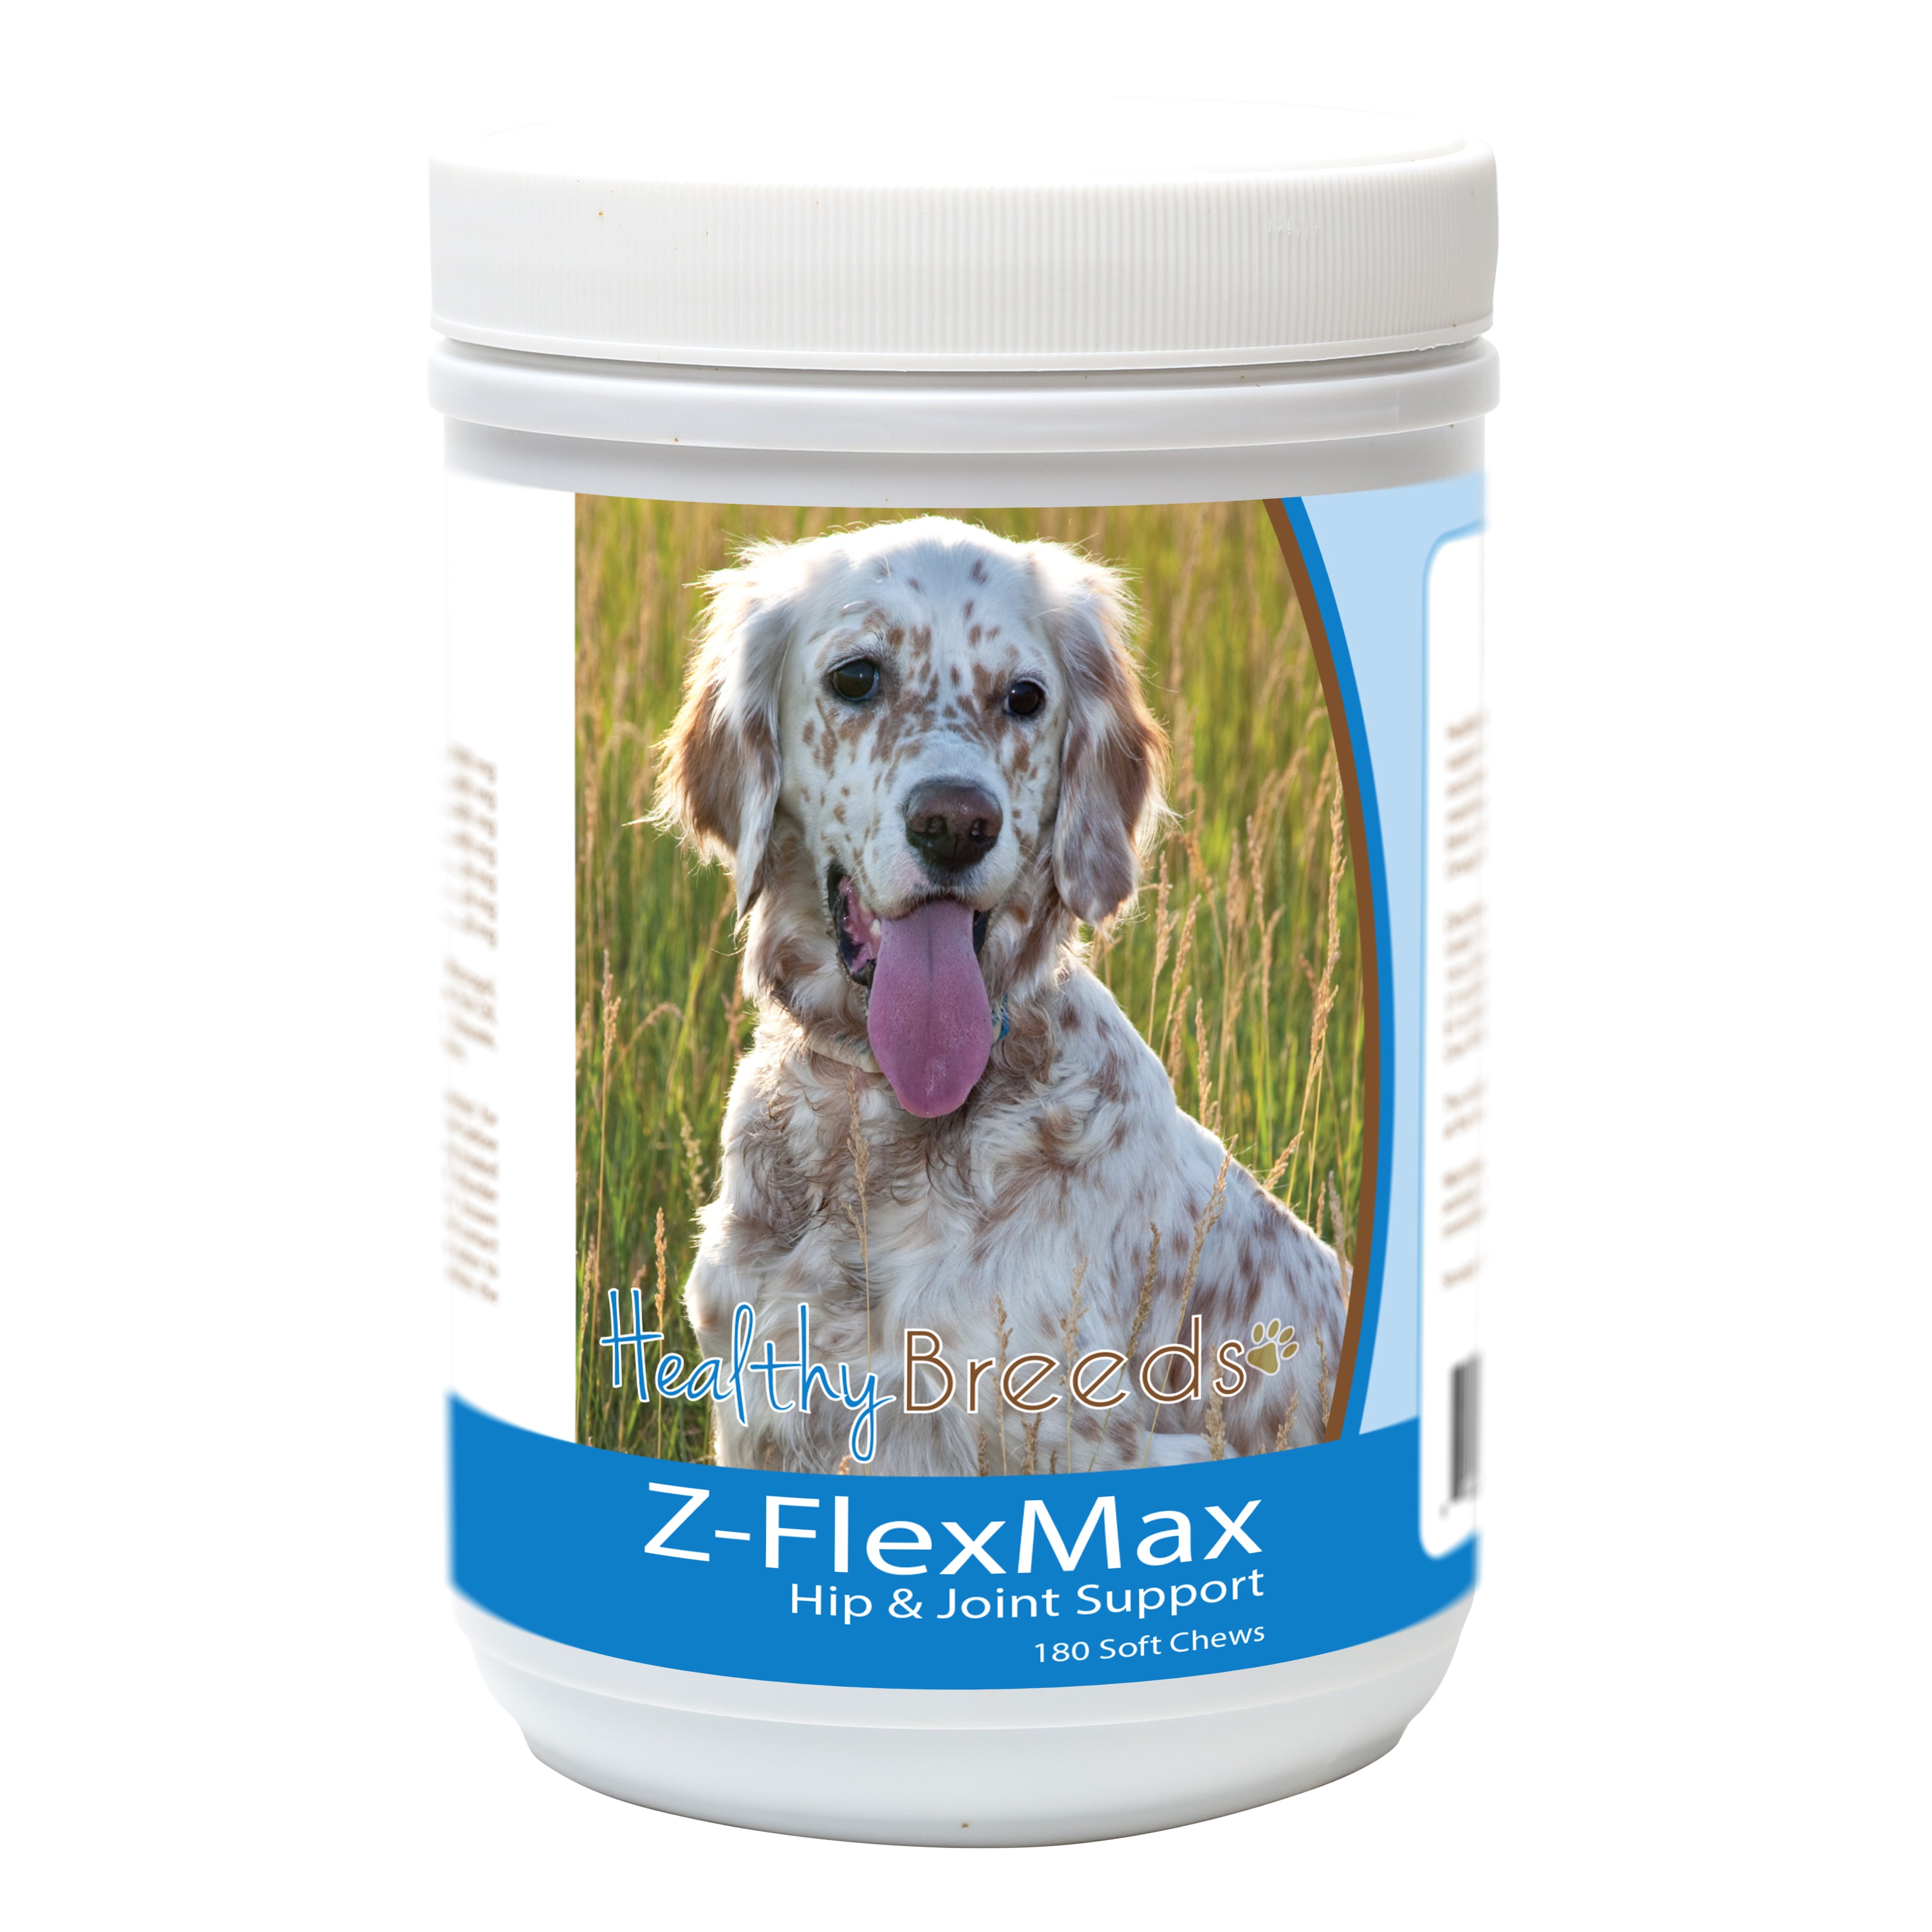 English Setter Z-Flex Max Dog Hip and Joint Support 180 Count